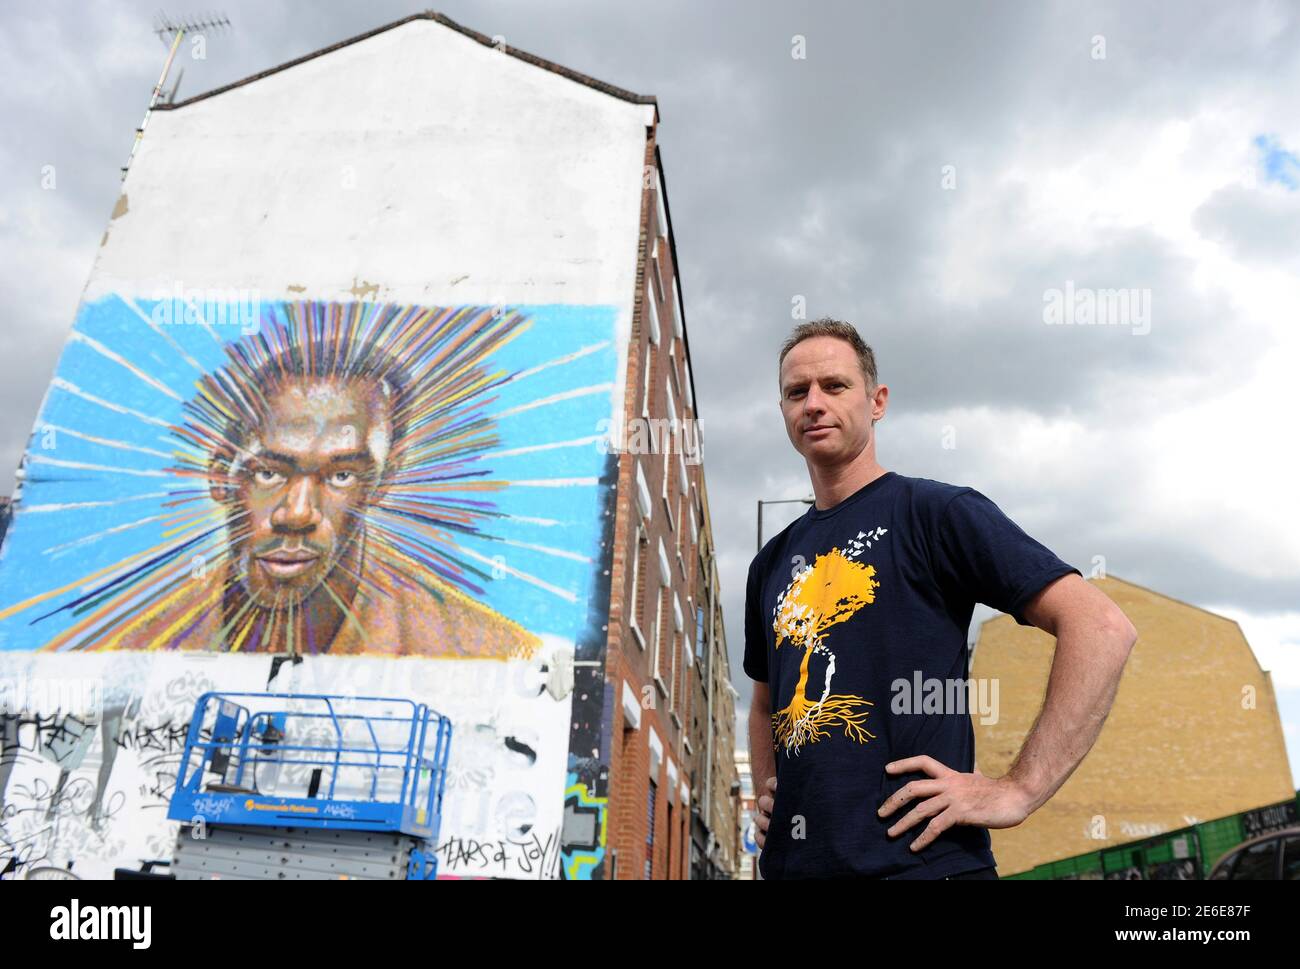 Street artist James Cochran, also known as Jimmy C, poses near his spray painted picture of Jamaican sprinter Usain Bolt in Sclater street car park in east London July 19, 2012. Cochran said this was done as an homage to the London 2012 Olympic Games, which begin July 27. REUTERS/Paul Hackett  (BRITAIN - Tags: SPORT OLYMPICS ATHLETICS ENTERTAINMENT) Stock Photo